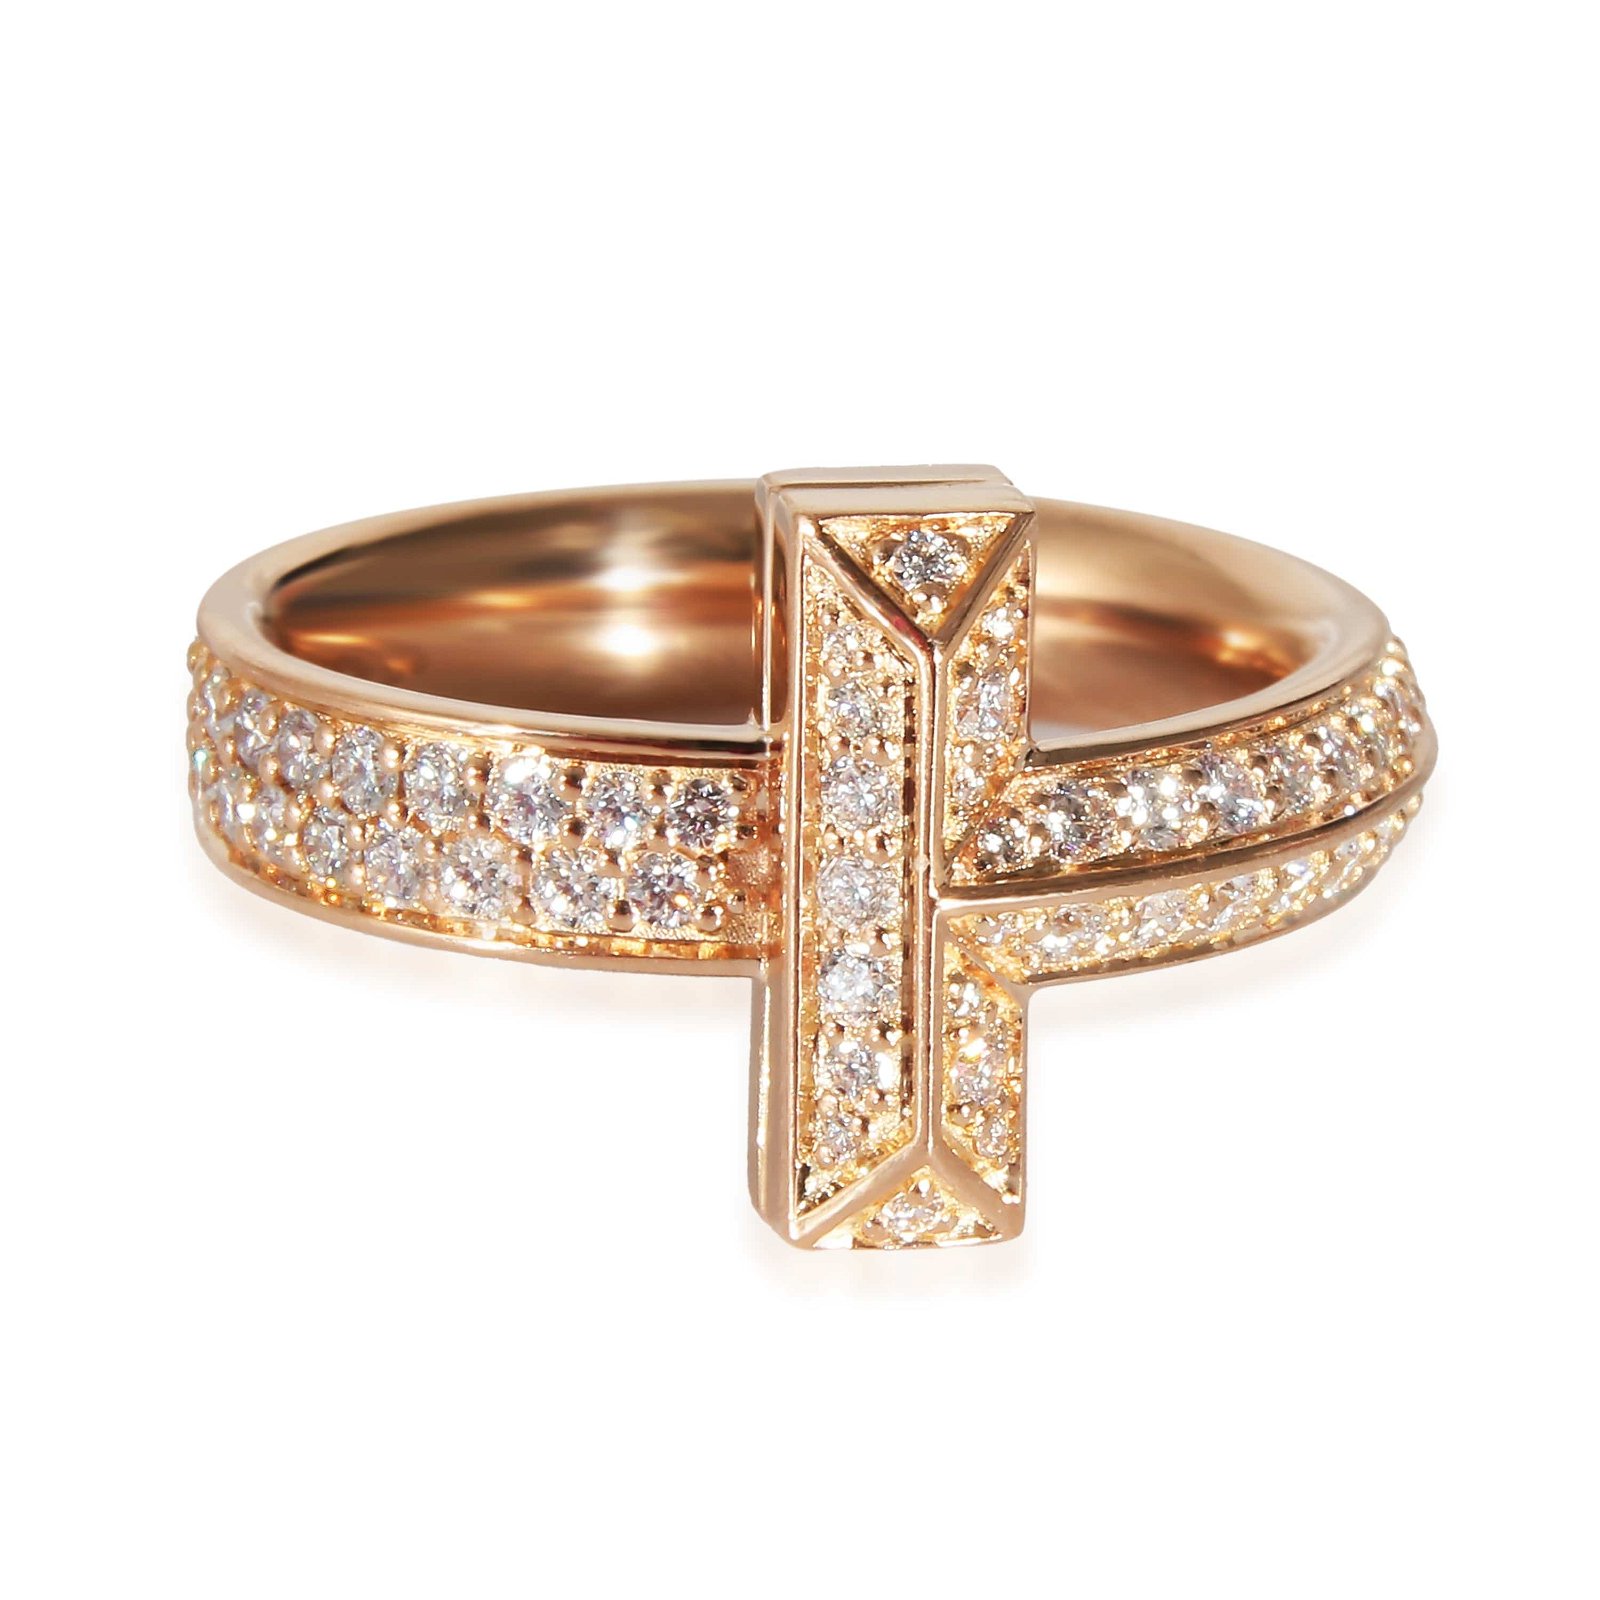 Image of Tiffany & Co. T T1 Diamond Ring in 18K Yellow Gold 0.55 CTW